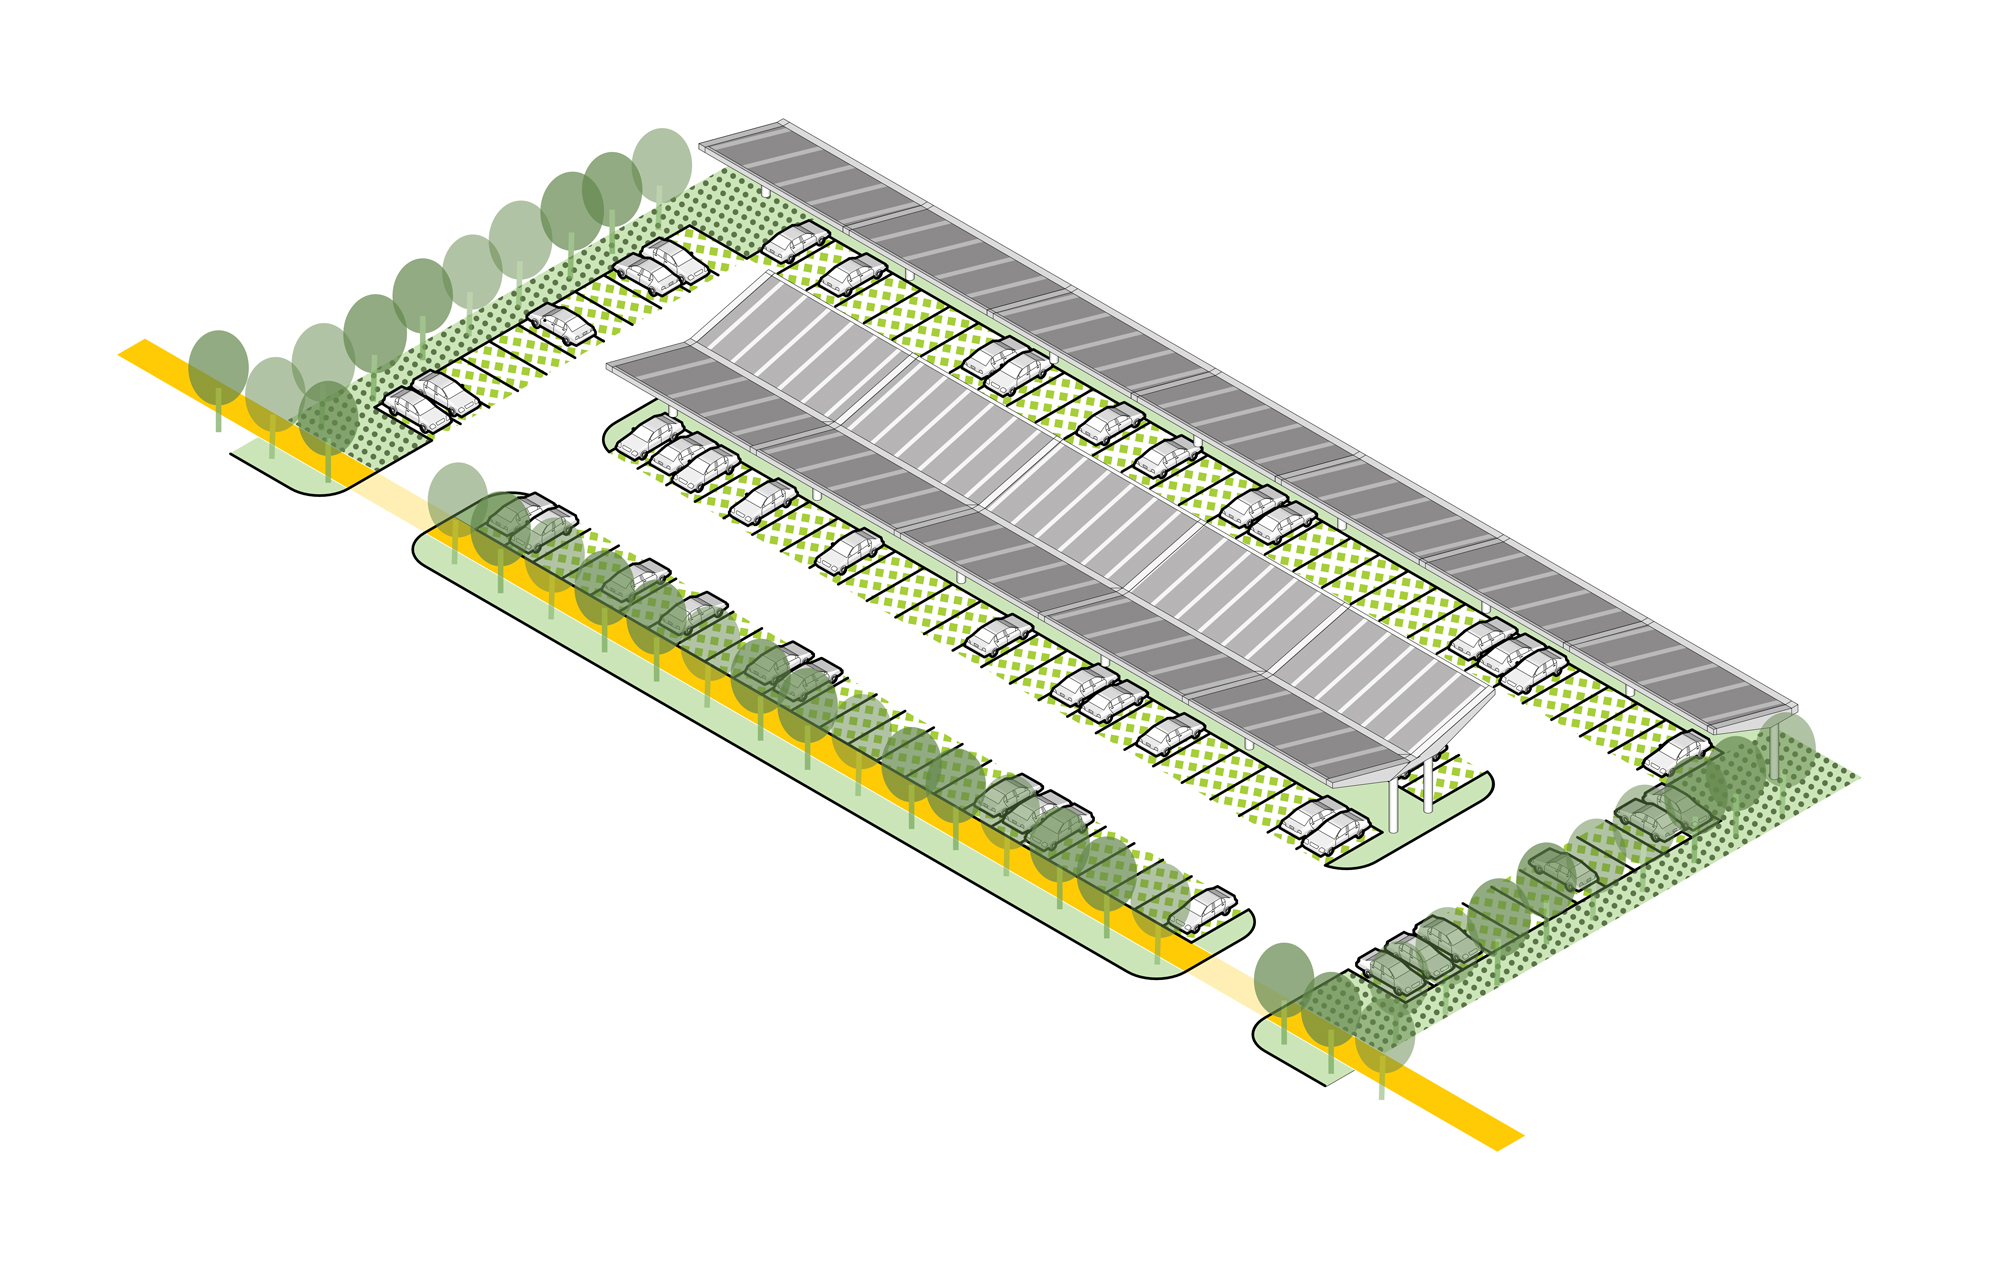  Concept rendering of a parking garden that provides stormwater management and solar panels. 